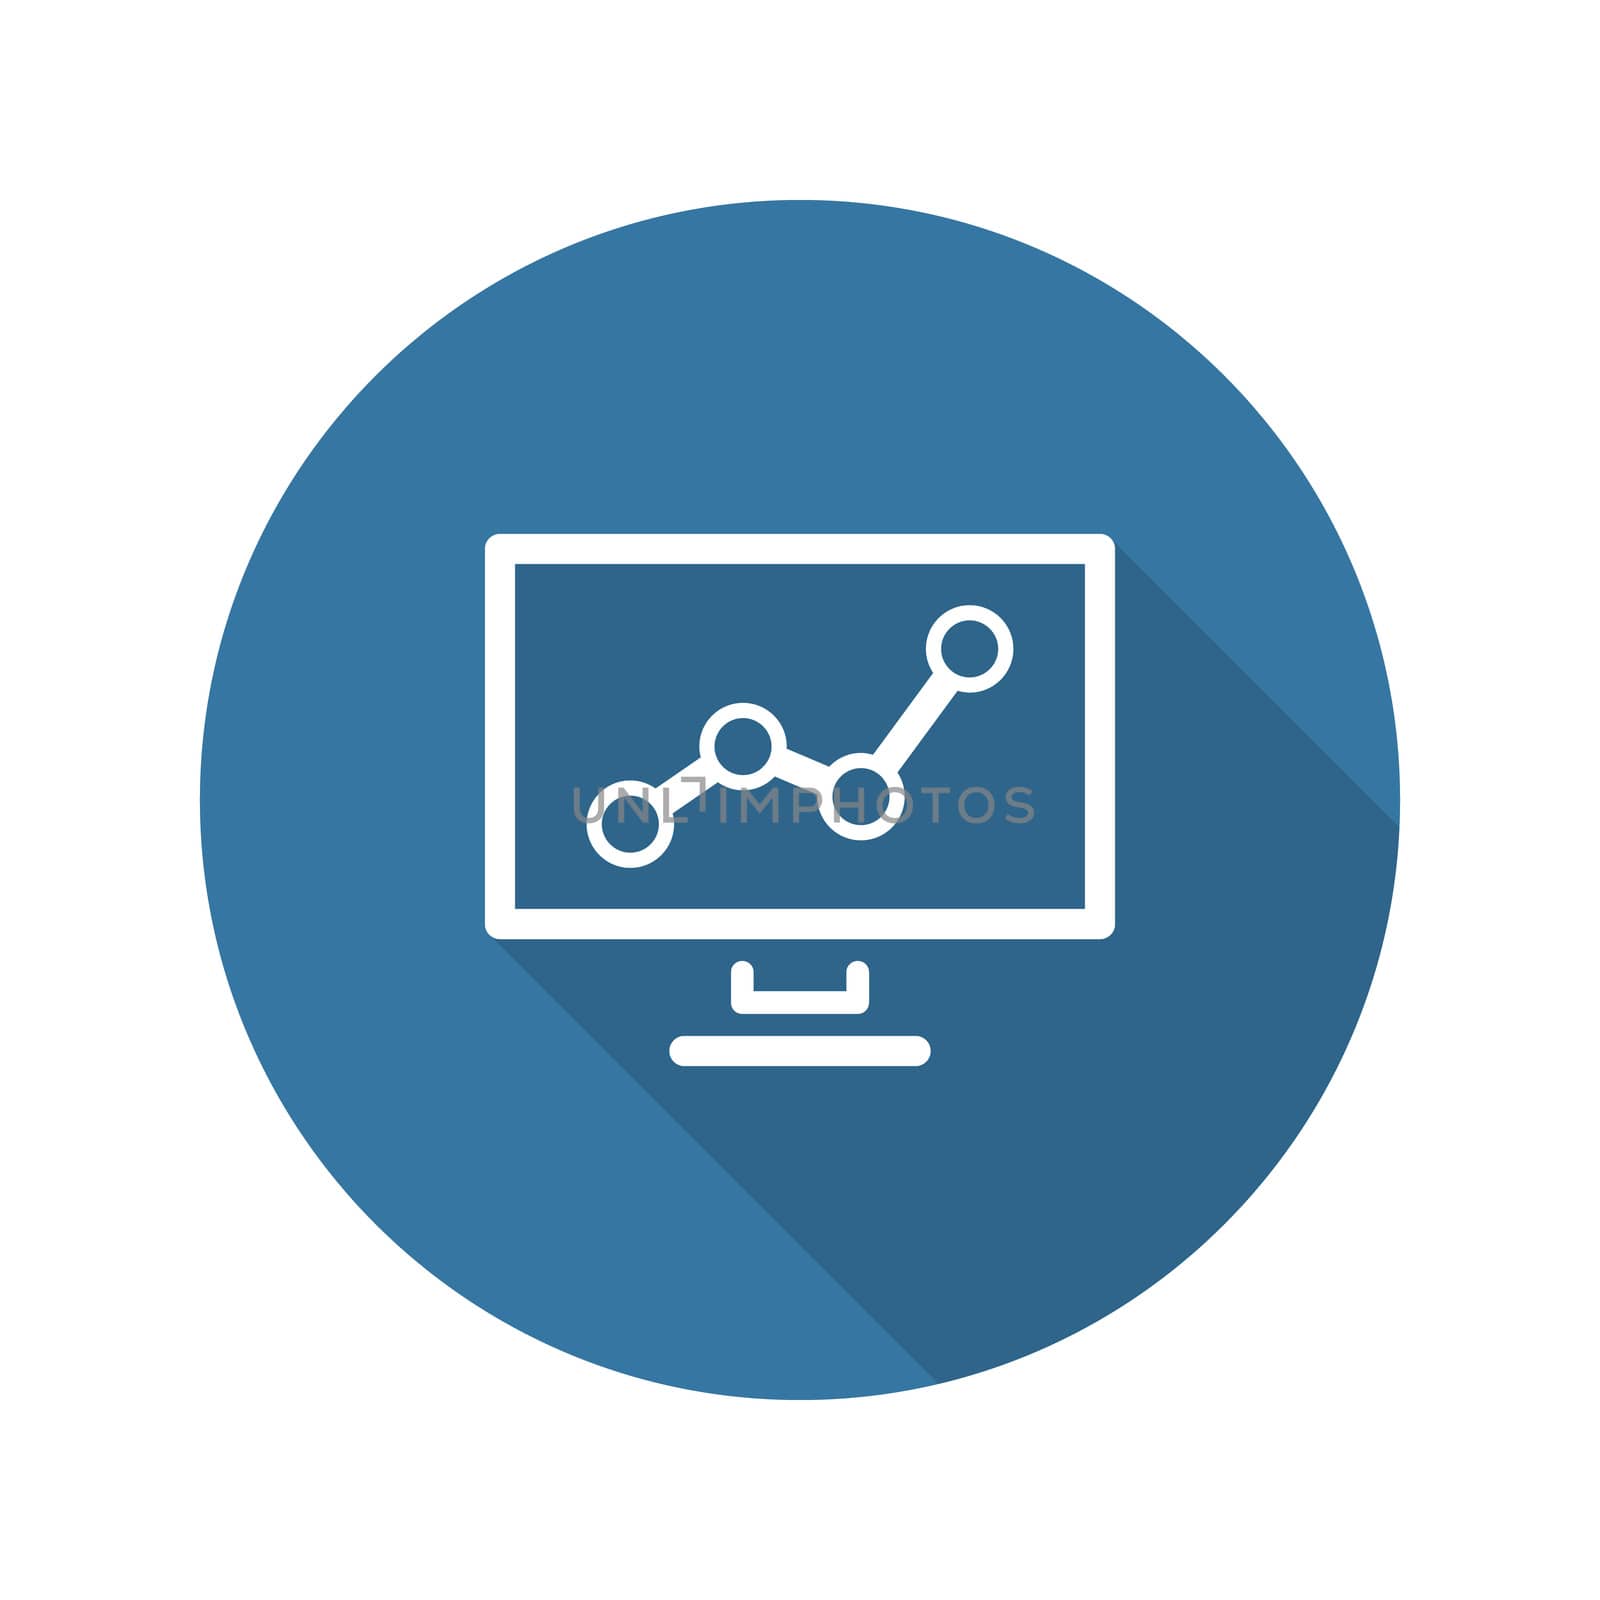 Business Analytics Icon. Business Concept. Flat Design. Long Shadow. Isolated Illustration.